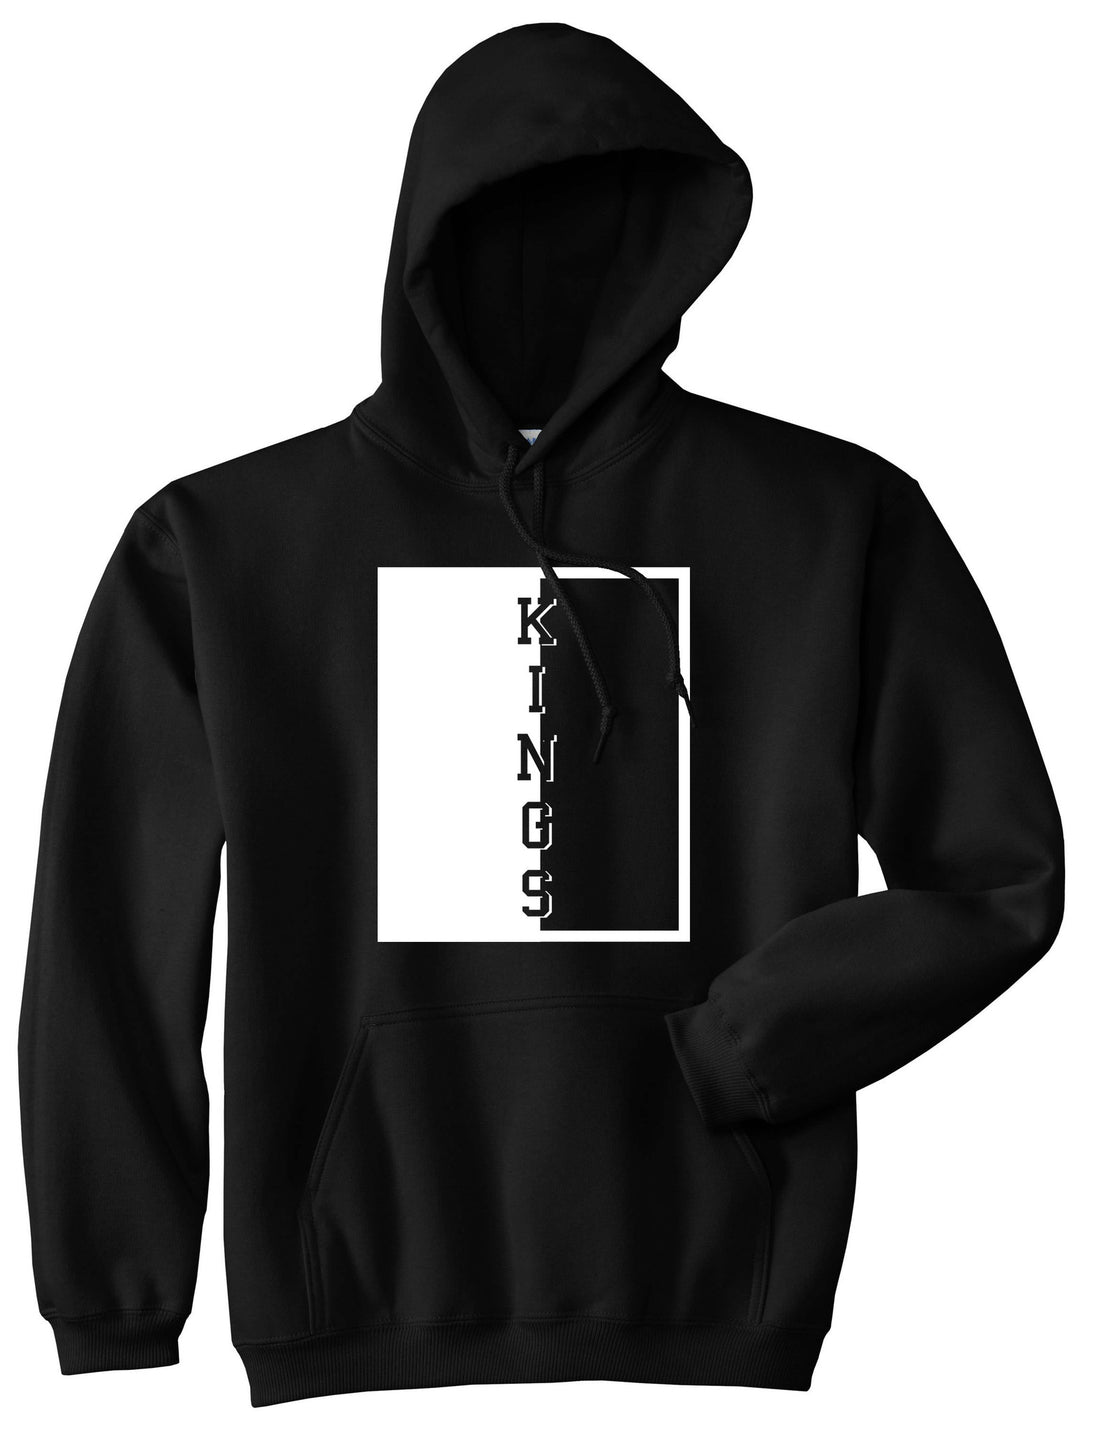 Scarface New York Tony Montana Pullover Hoodie Hoody in Black by Kings Of NY